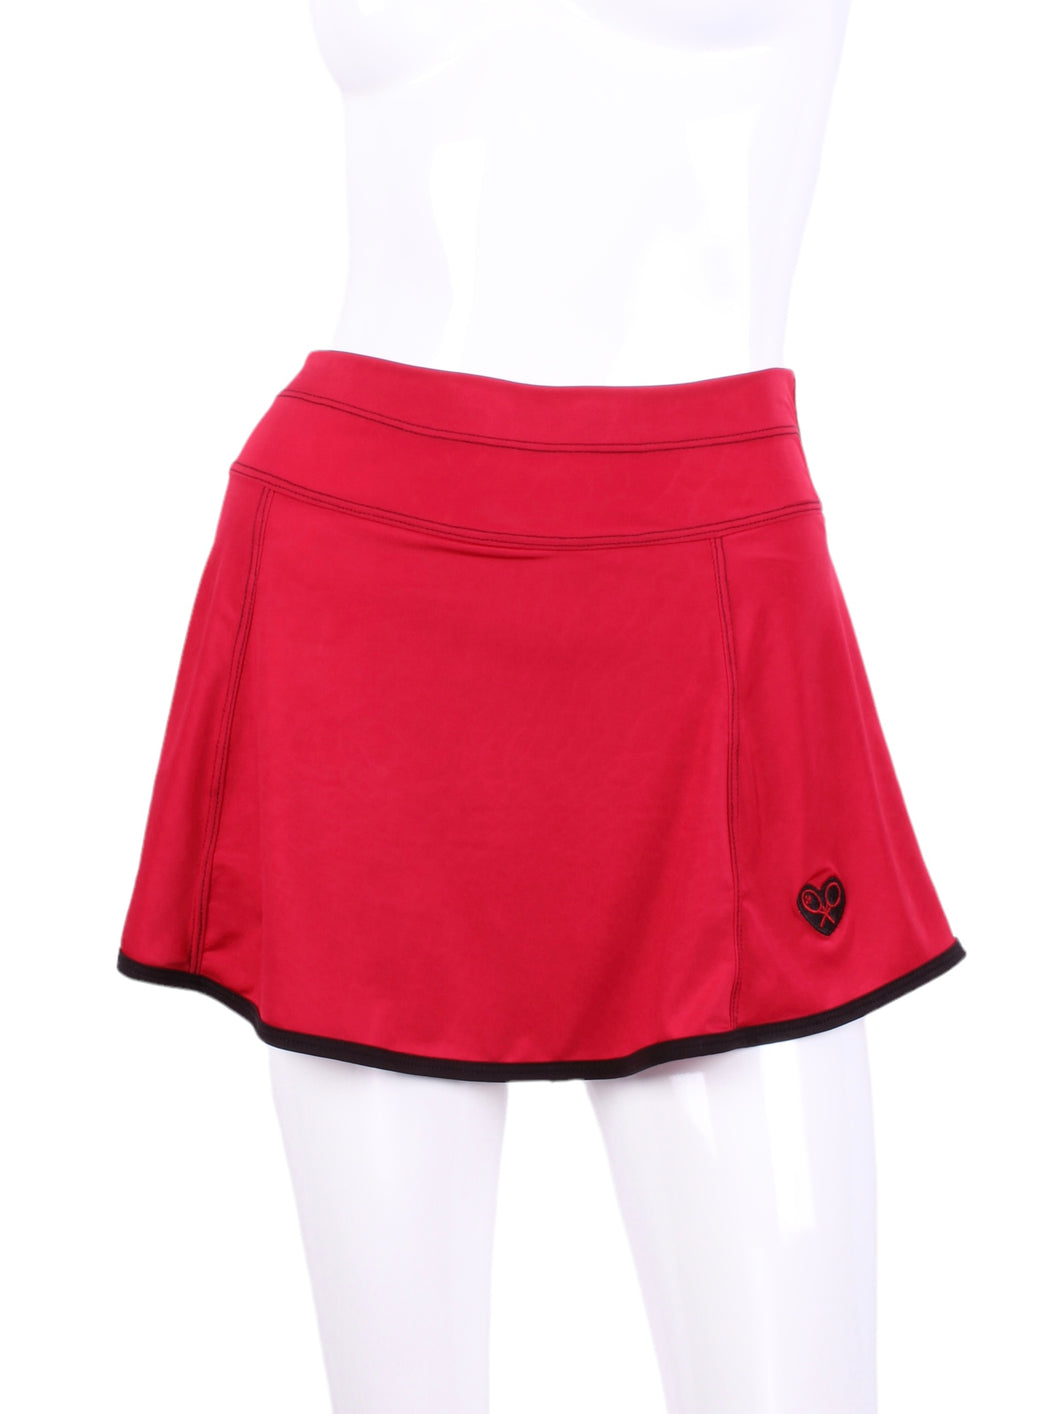 Gladiator Skirt Red - I LOVE MY DOUBLES PARTNER!!!  This is our limited edition Gladiator Skirt Red.  This piece has a silky soft and quick-drying matching shorties, and binding to match.  We make these in very small quantities - by design.  Unique.  Luxurious.  Comfortable.  Cool.  Fun.